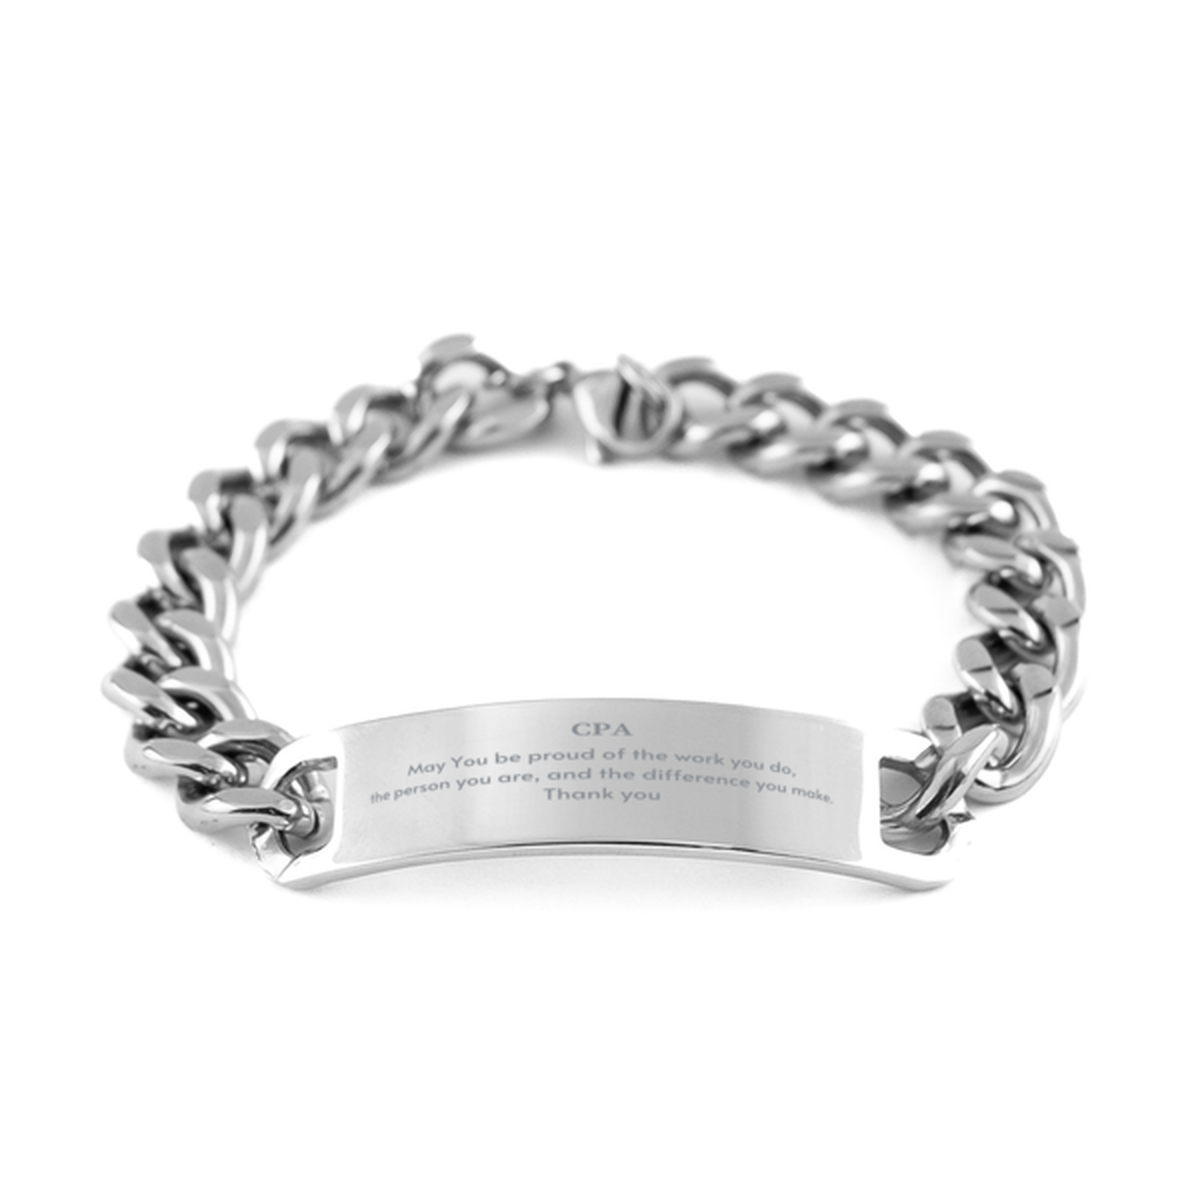 Heartwarming Cuban Chain Stainless Steel Bracelet Retirement Coworkers Gifts for CPA, CPA May You be proud of the work you do, the person you are Gifts for Boss Men Women Friends